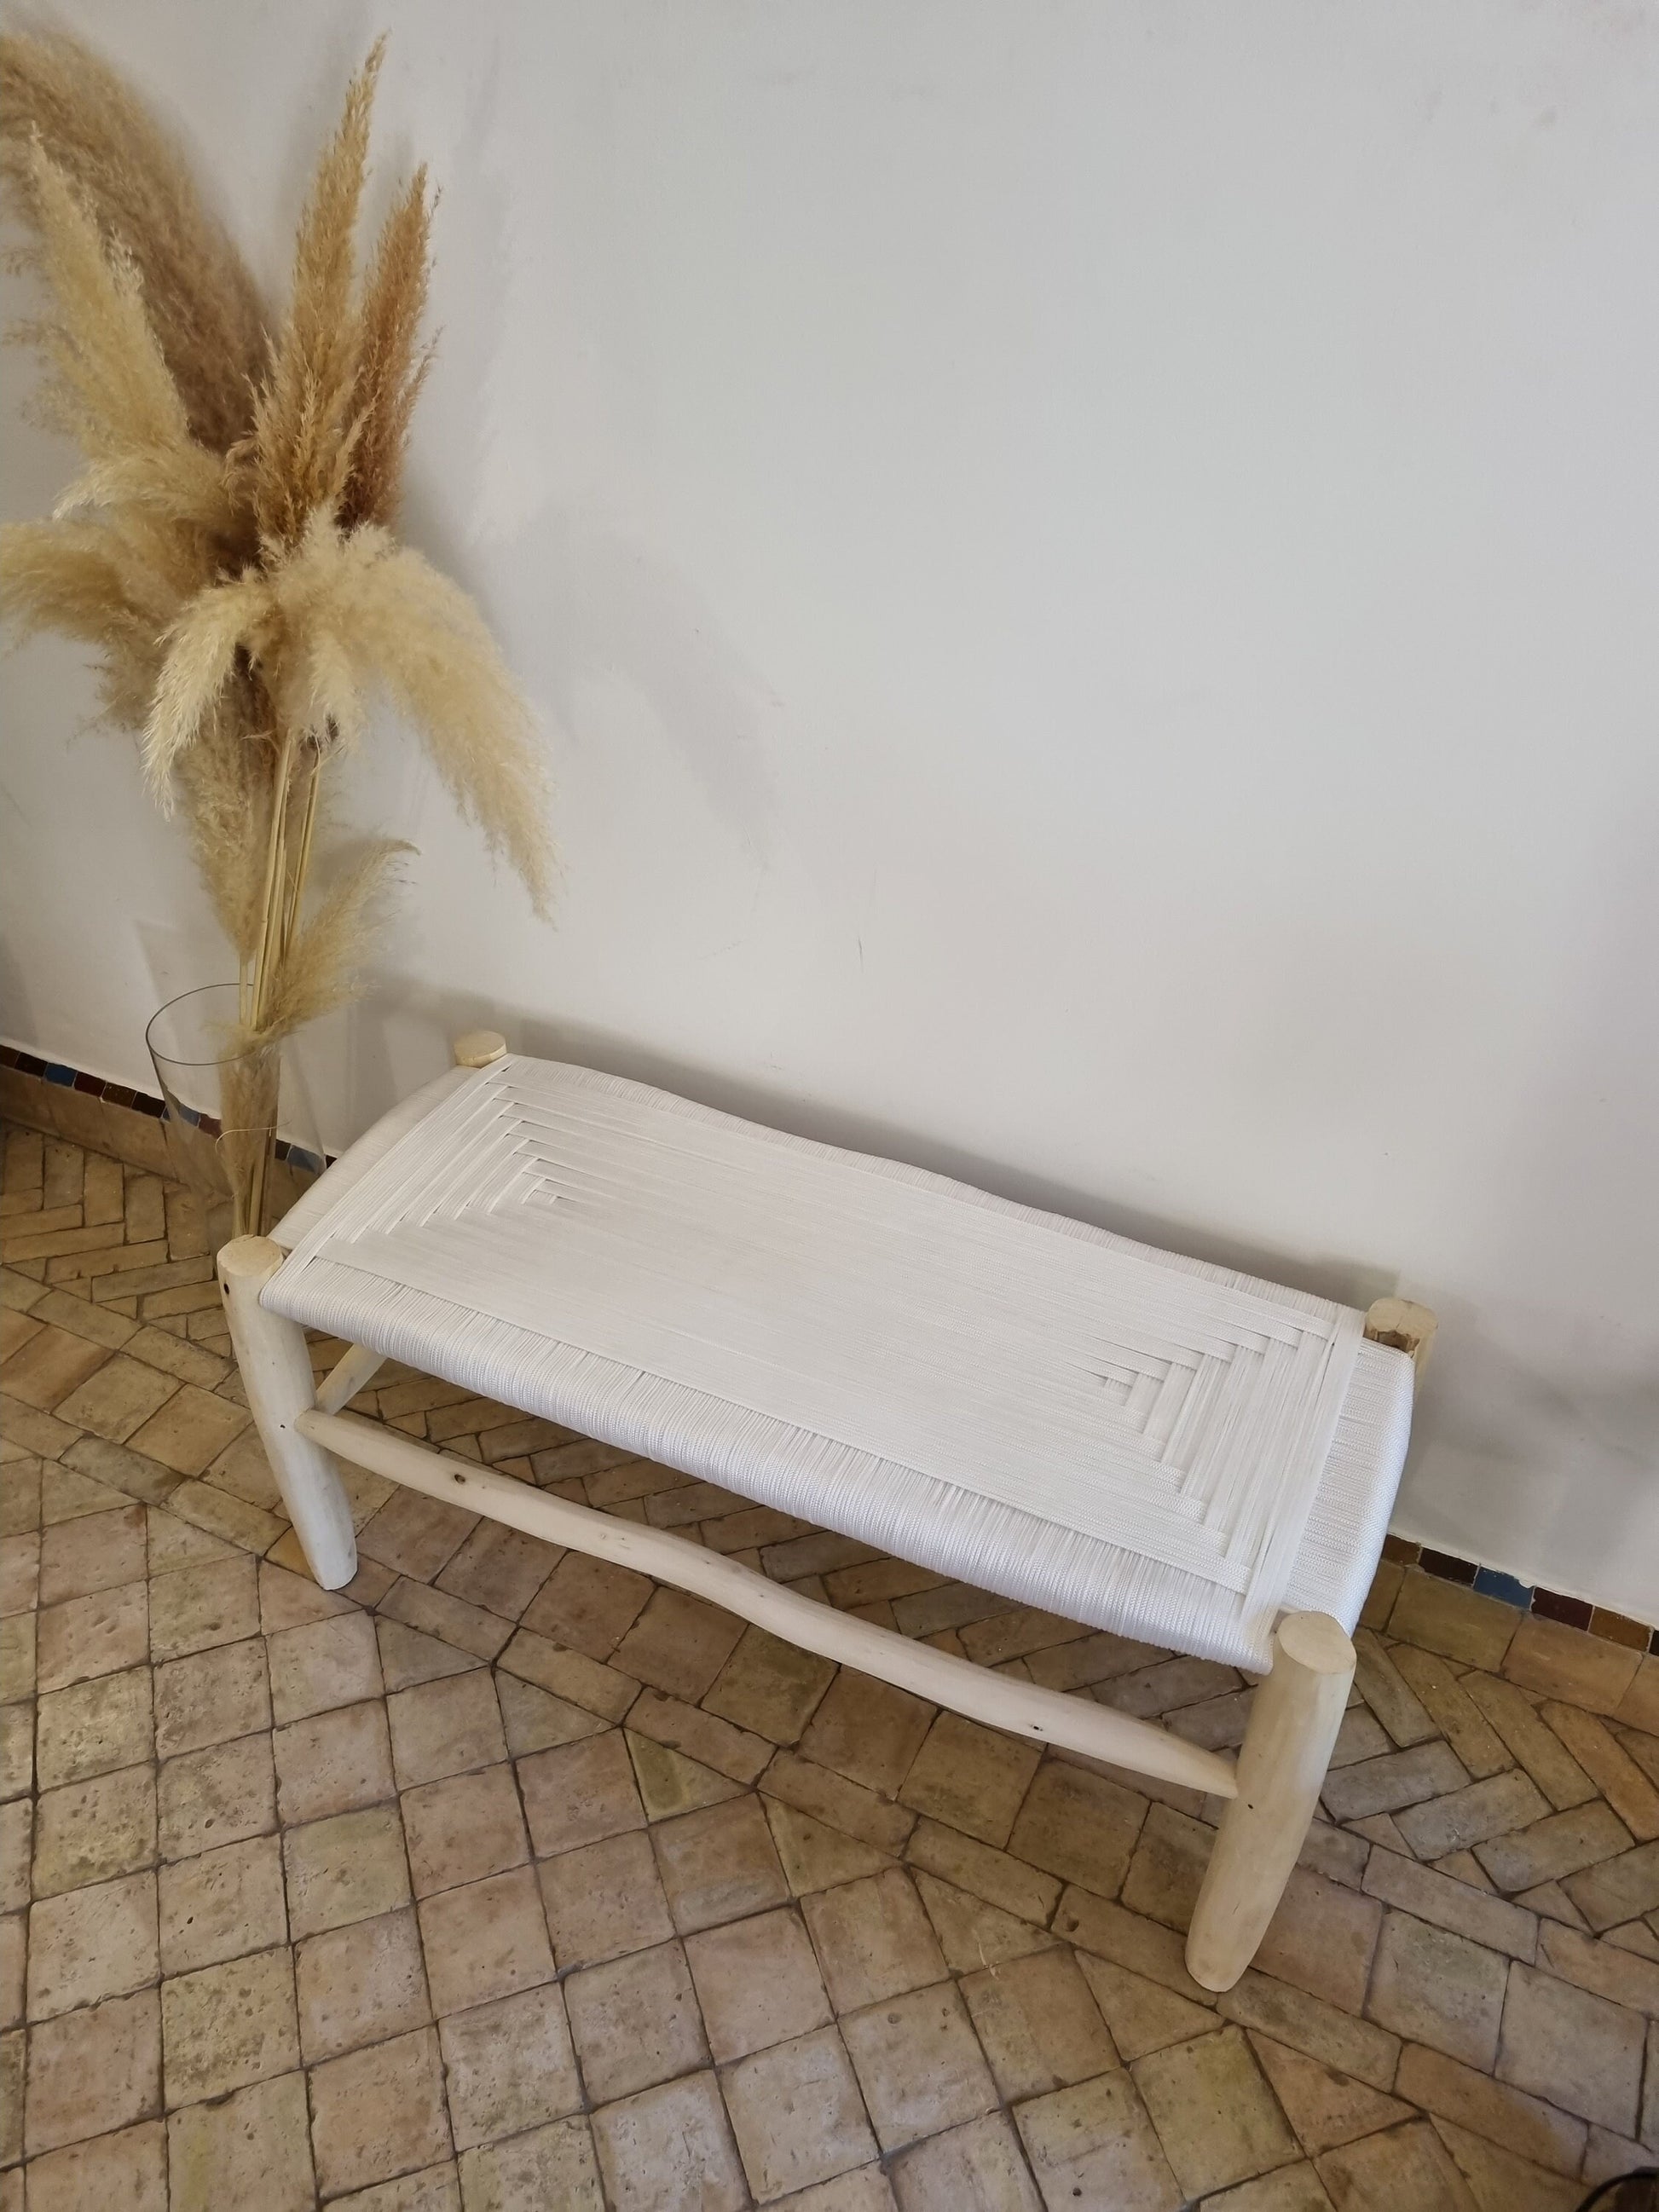 Moroccan bench with solid wood construction and intricate wire braiding.